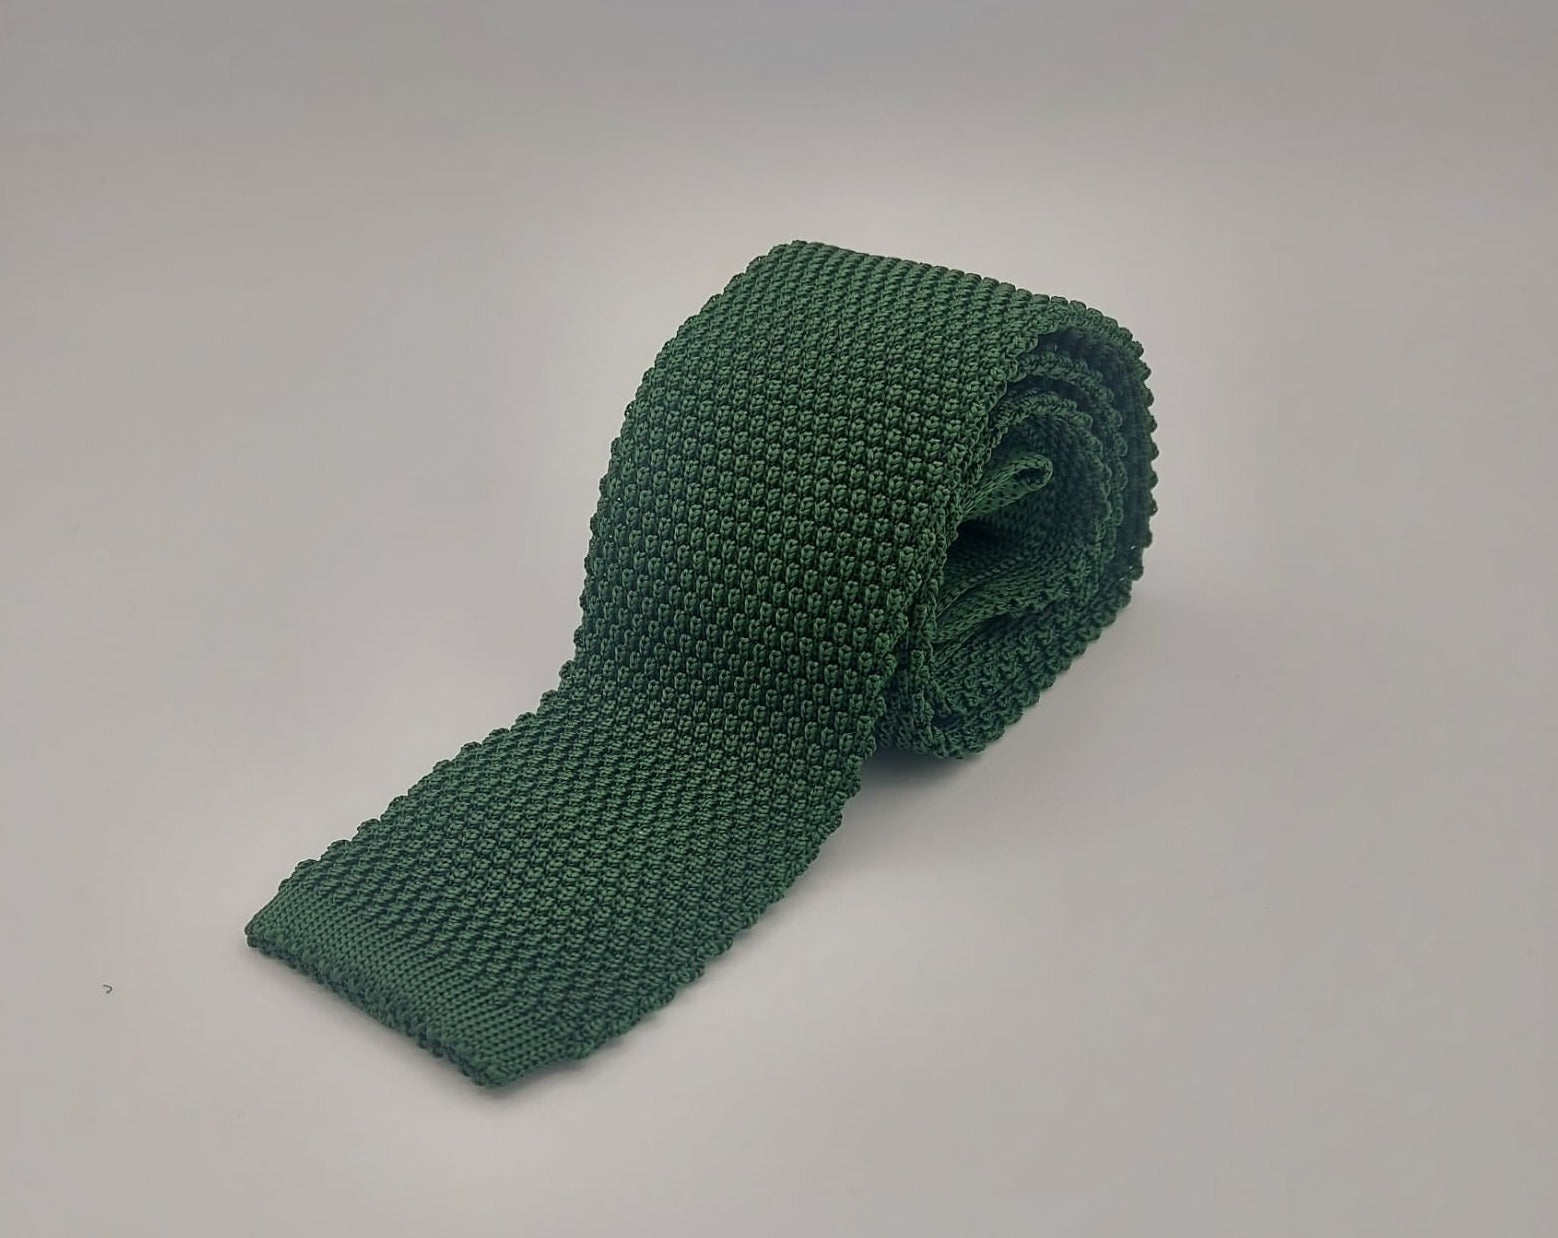 Cruciani & Bella 100% Knitted Silk Green knitted tie Plain Tie Handmade in Italy 6 cm x 145 cm #6362